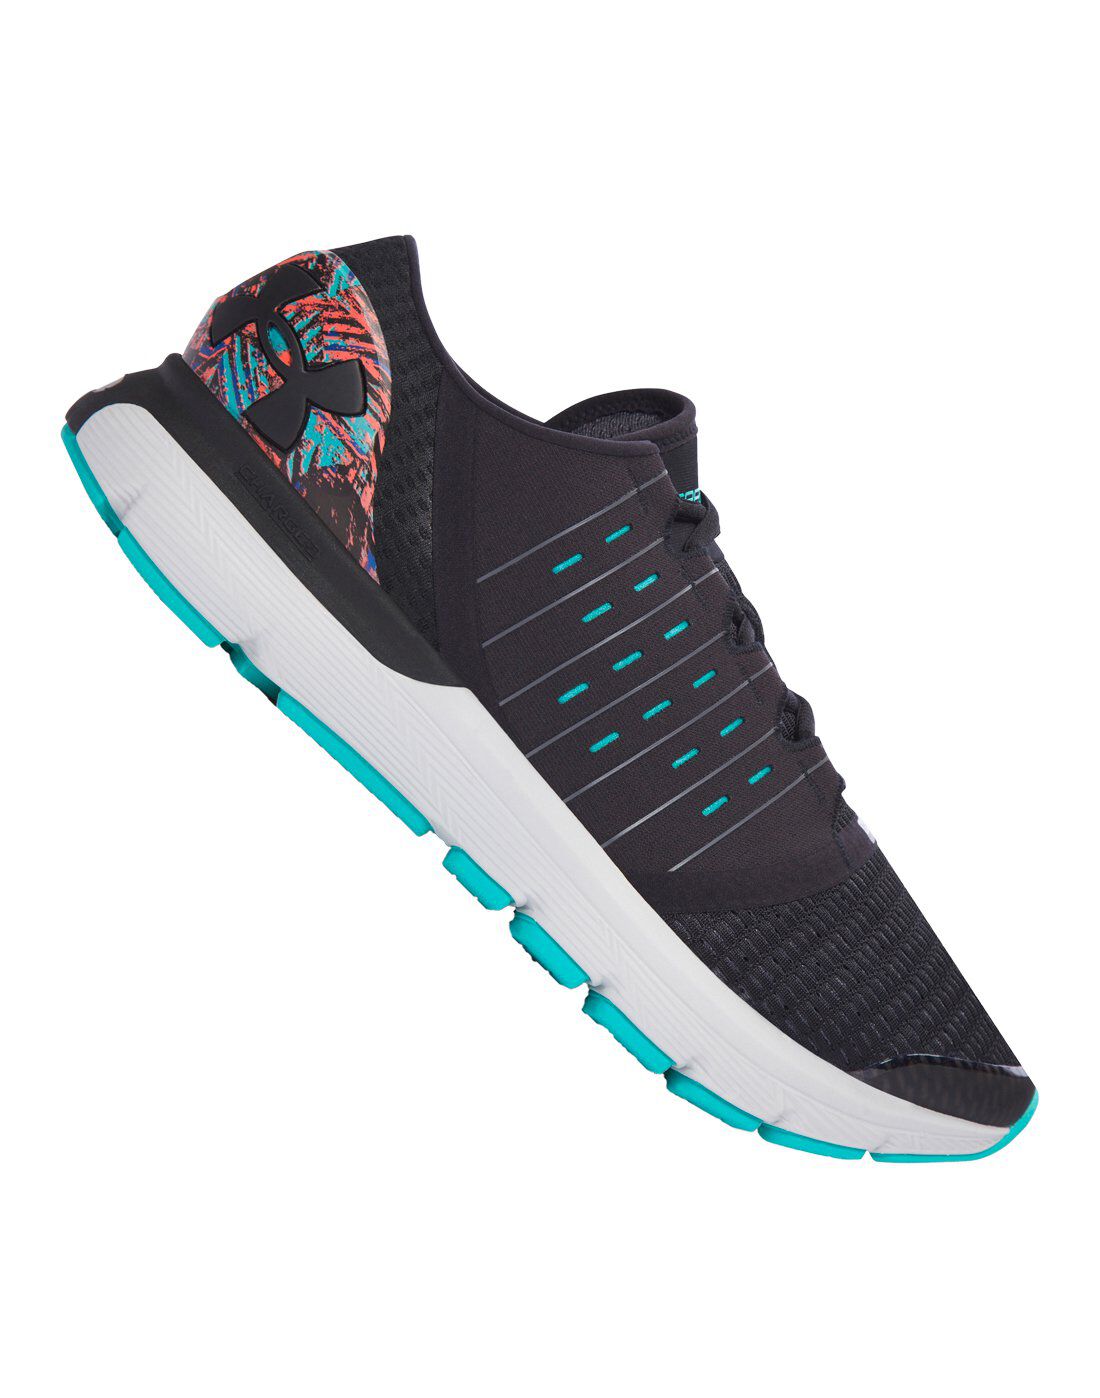 Under Armour Mens Speedform Europa Record Equipped - Black | Life Style  Sports IE